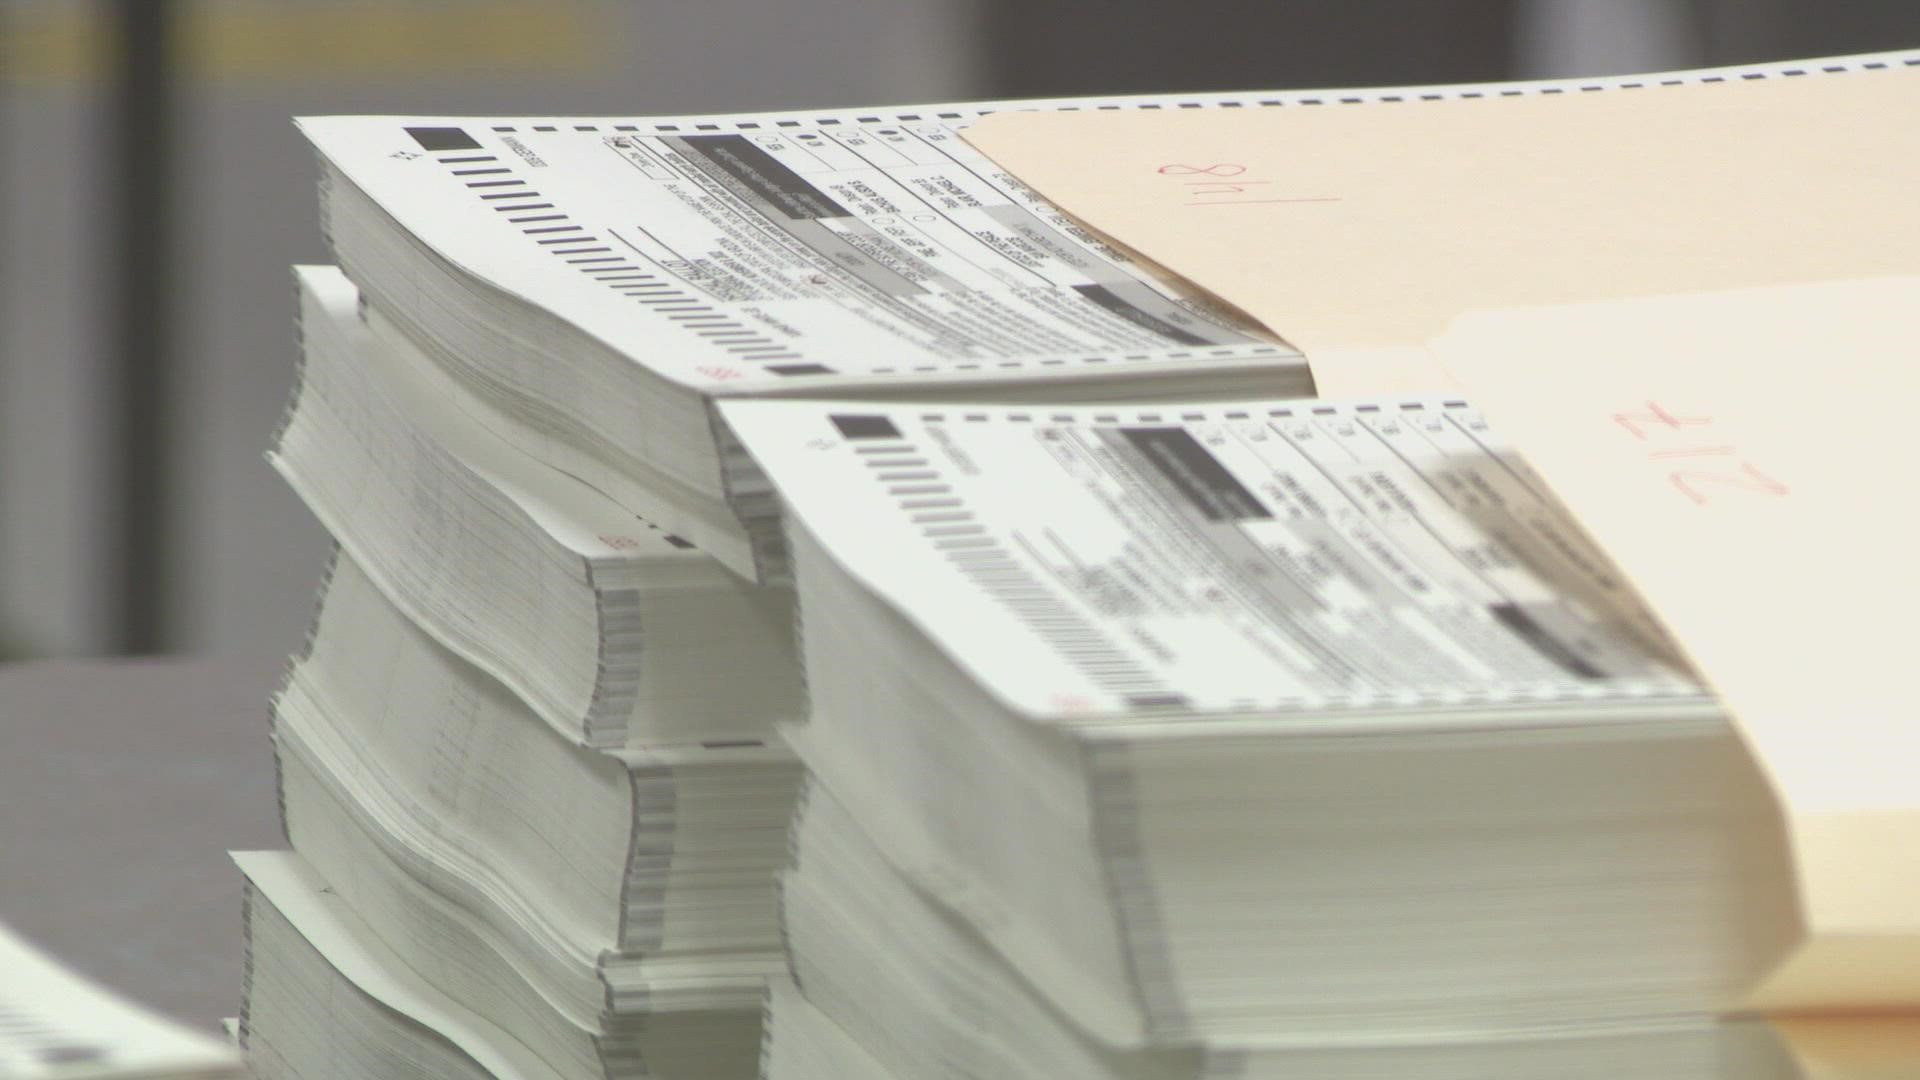 The Maricopa County Elections Department tested its ballot tabulators this week ahead of the upcoming general election.